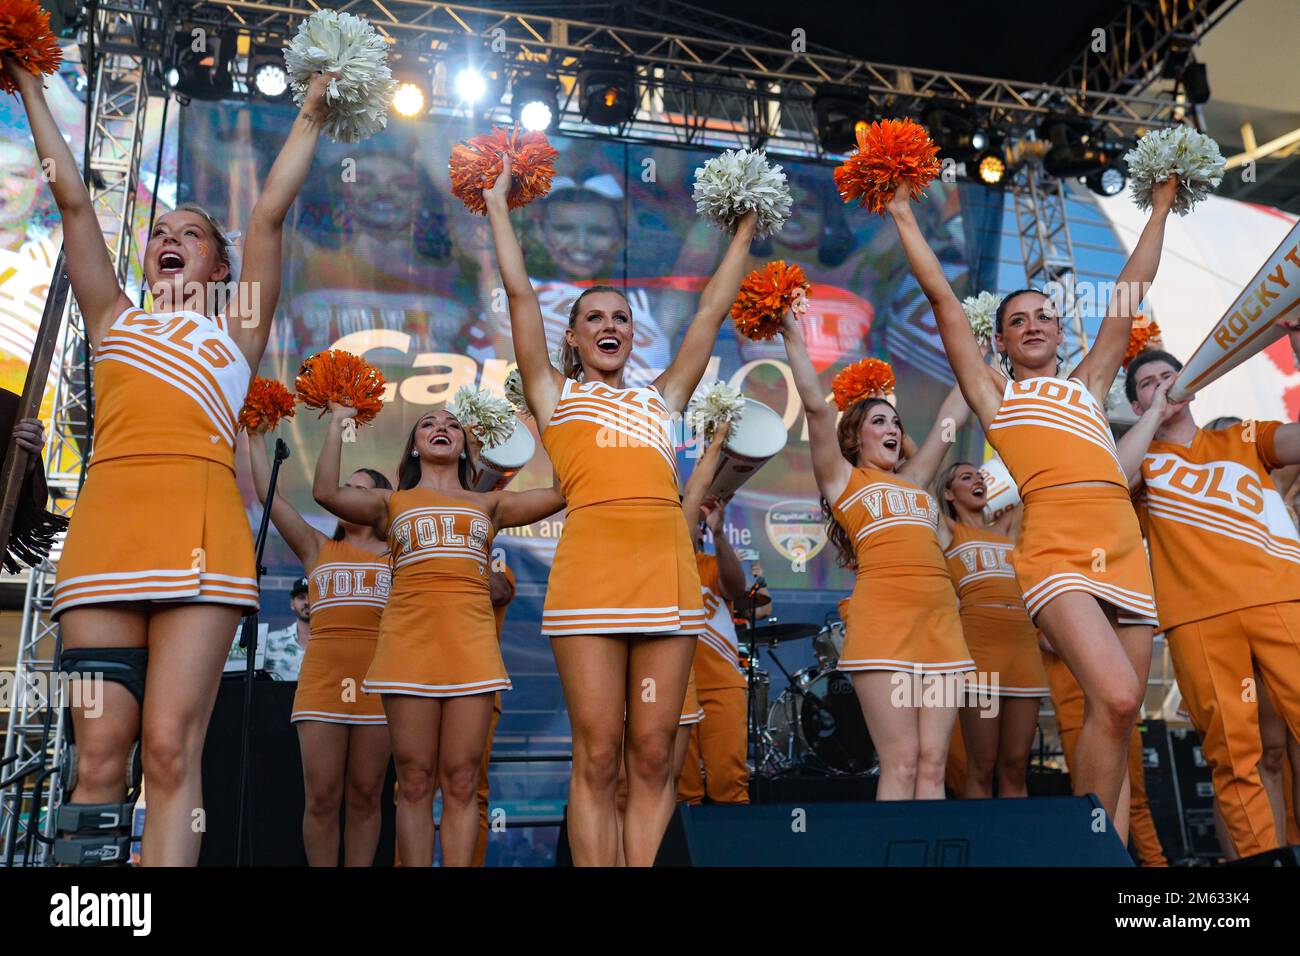 Miami Gardens, FL, USA. 30th Dec, 2022. The Tennessee cheerleaders performs during the Orange Bowl Fan Fest prior to the 2022 Capital One Orange Bowl football game between the Clemson Tigers and Tennessee Volunteers at Hard Rock Stadium in Miami Gardens, FL. Kyle Okita/CSM/Alamy Live News Stock Photo